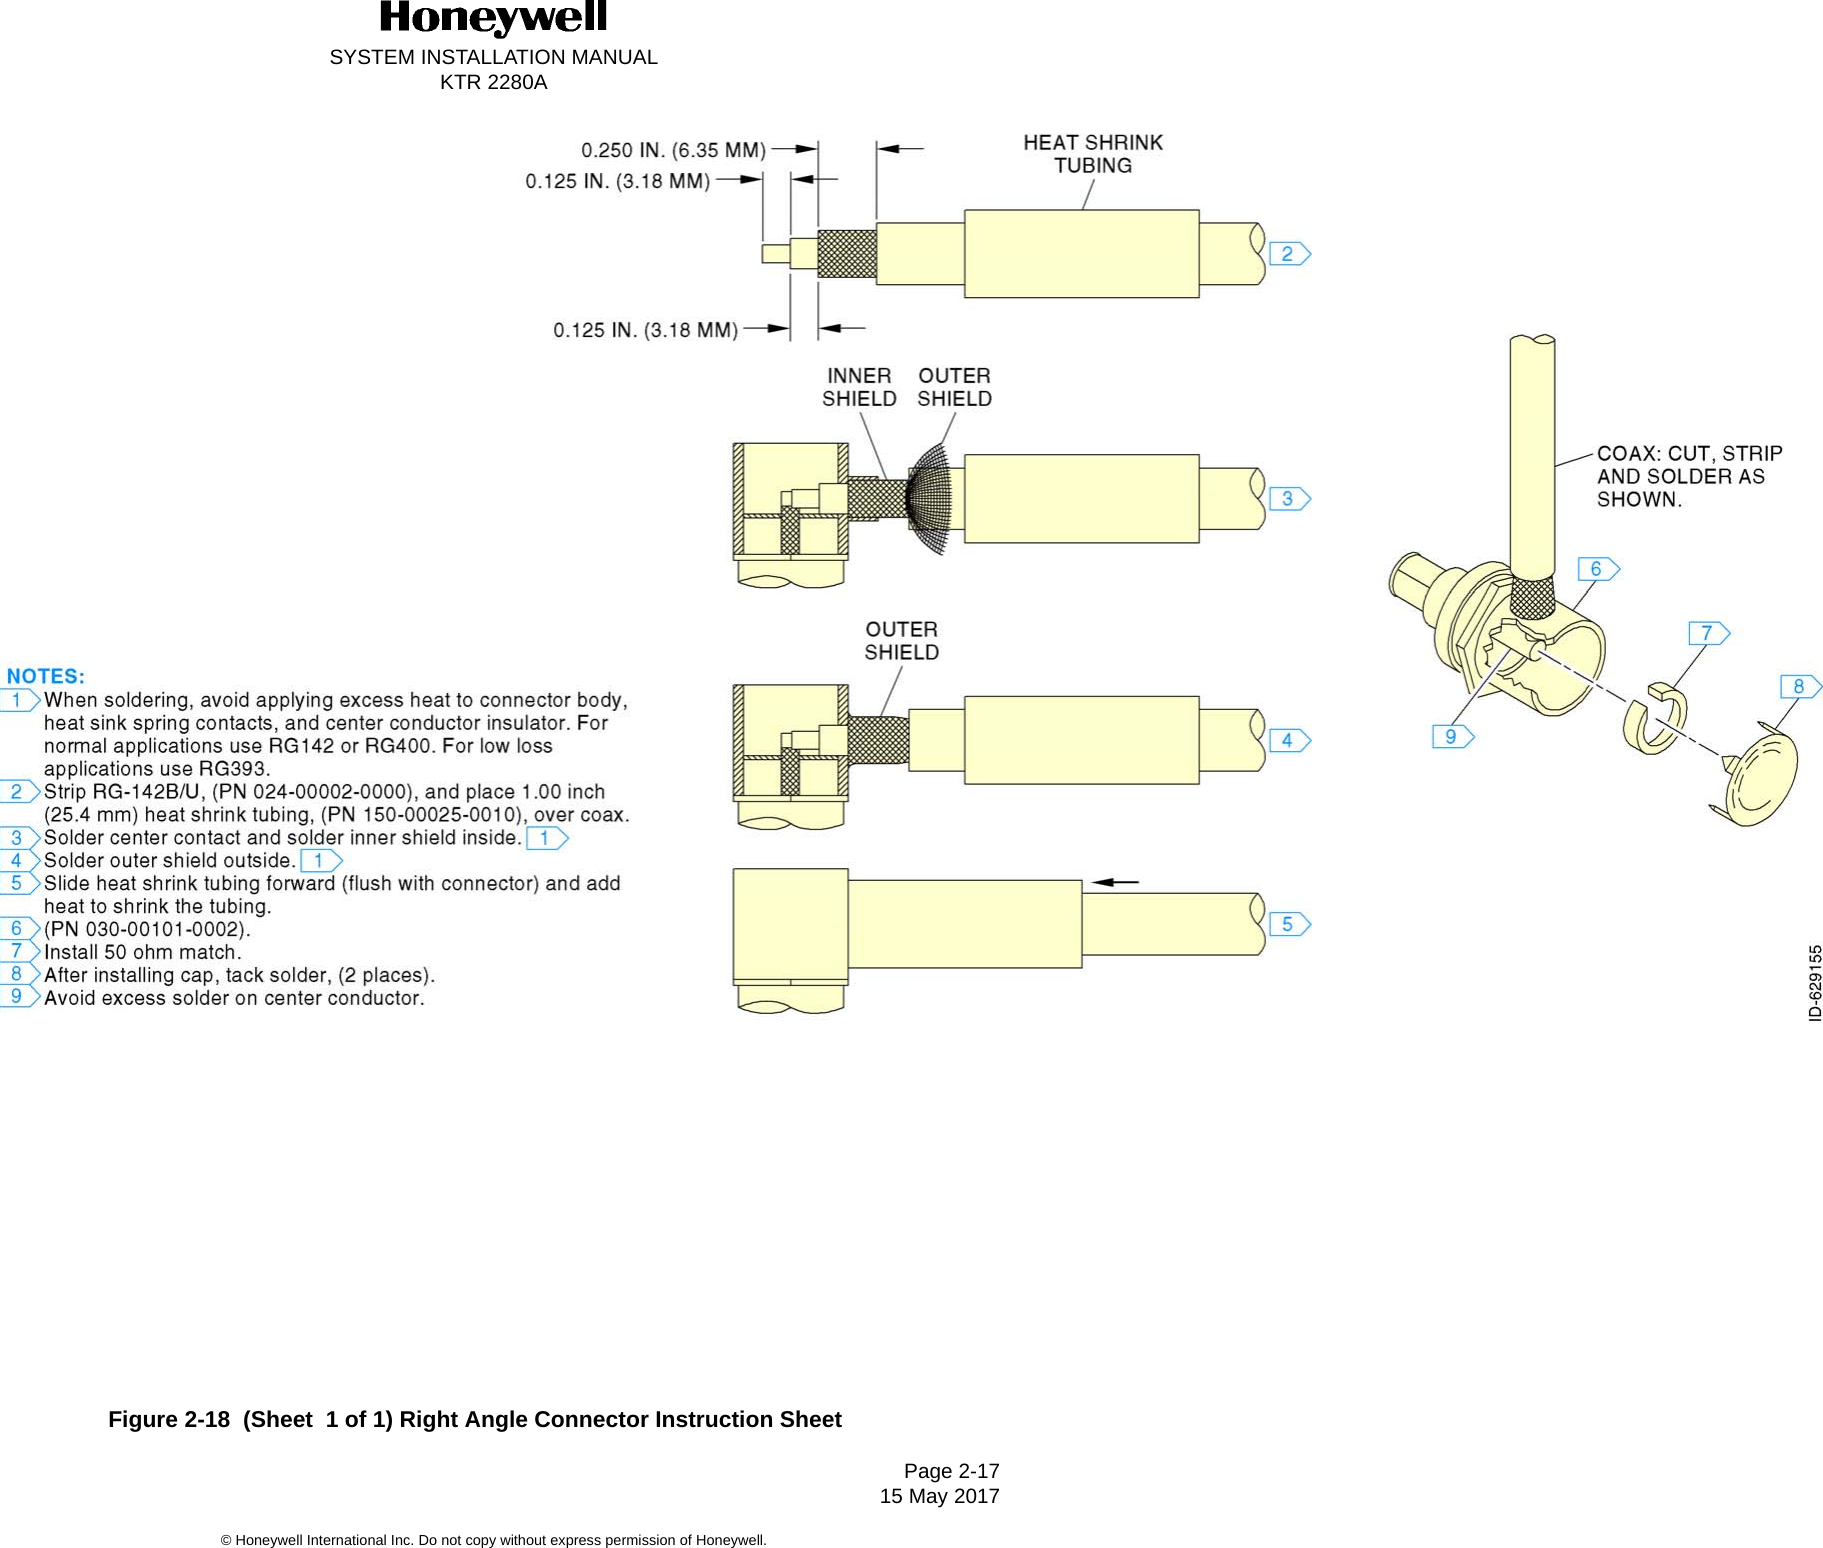 SYSTEM INSTALLATION MANUALKTR 2280APage 2-17 15 May 2017© Honeywell International Inc. Do not copy without express permission of Honeywell.Figure 2-18  (Sheet  1 of 1) Right Angle Connector Instruction Sheet